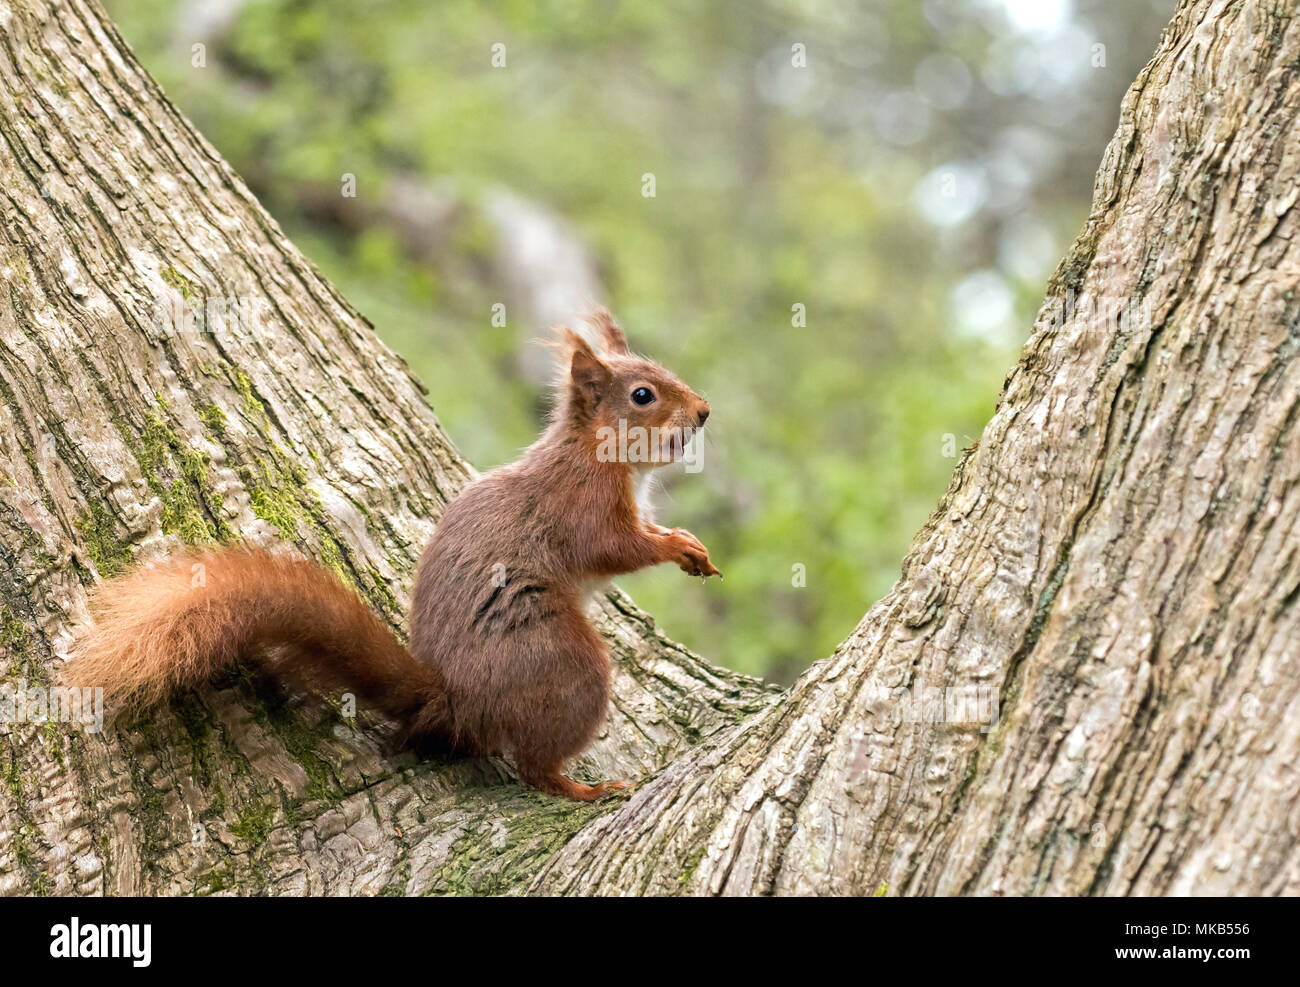 Red Squirrel in fork of tree, hazelnut in its mouth. Stock Photo